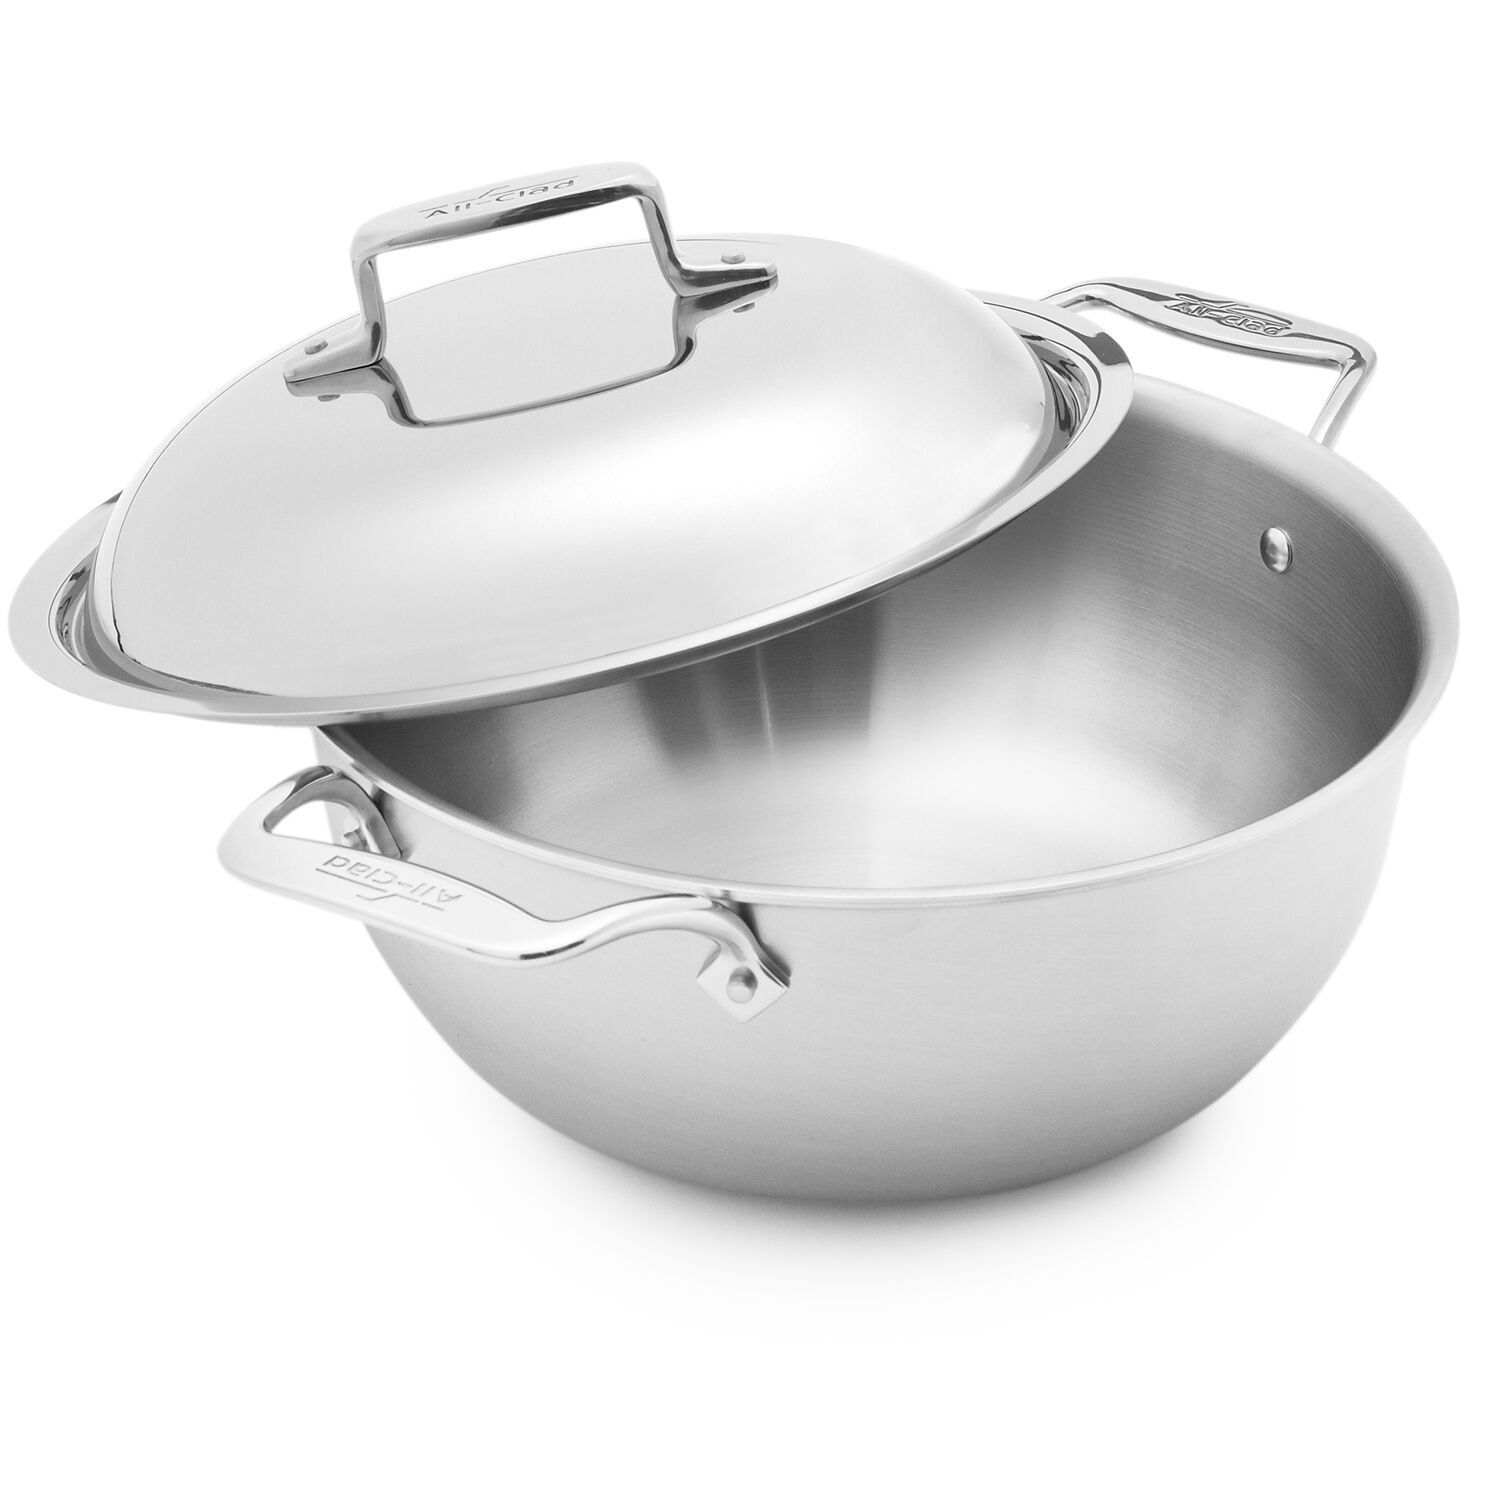 Home & Garden All-clad D5 Brushed Stainless Steel 5-ply Bonded 7.5 Inch All Clad D5 Brushed Stainless Steel Skillet